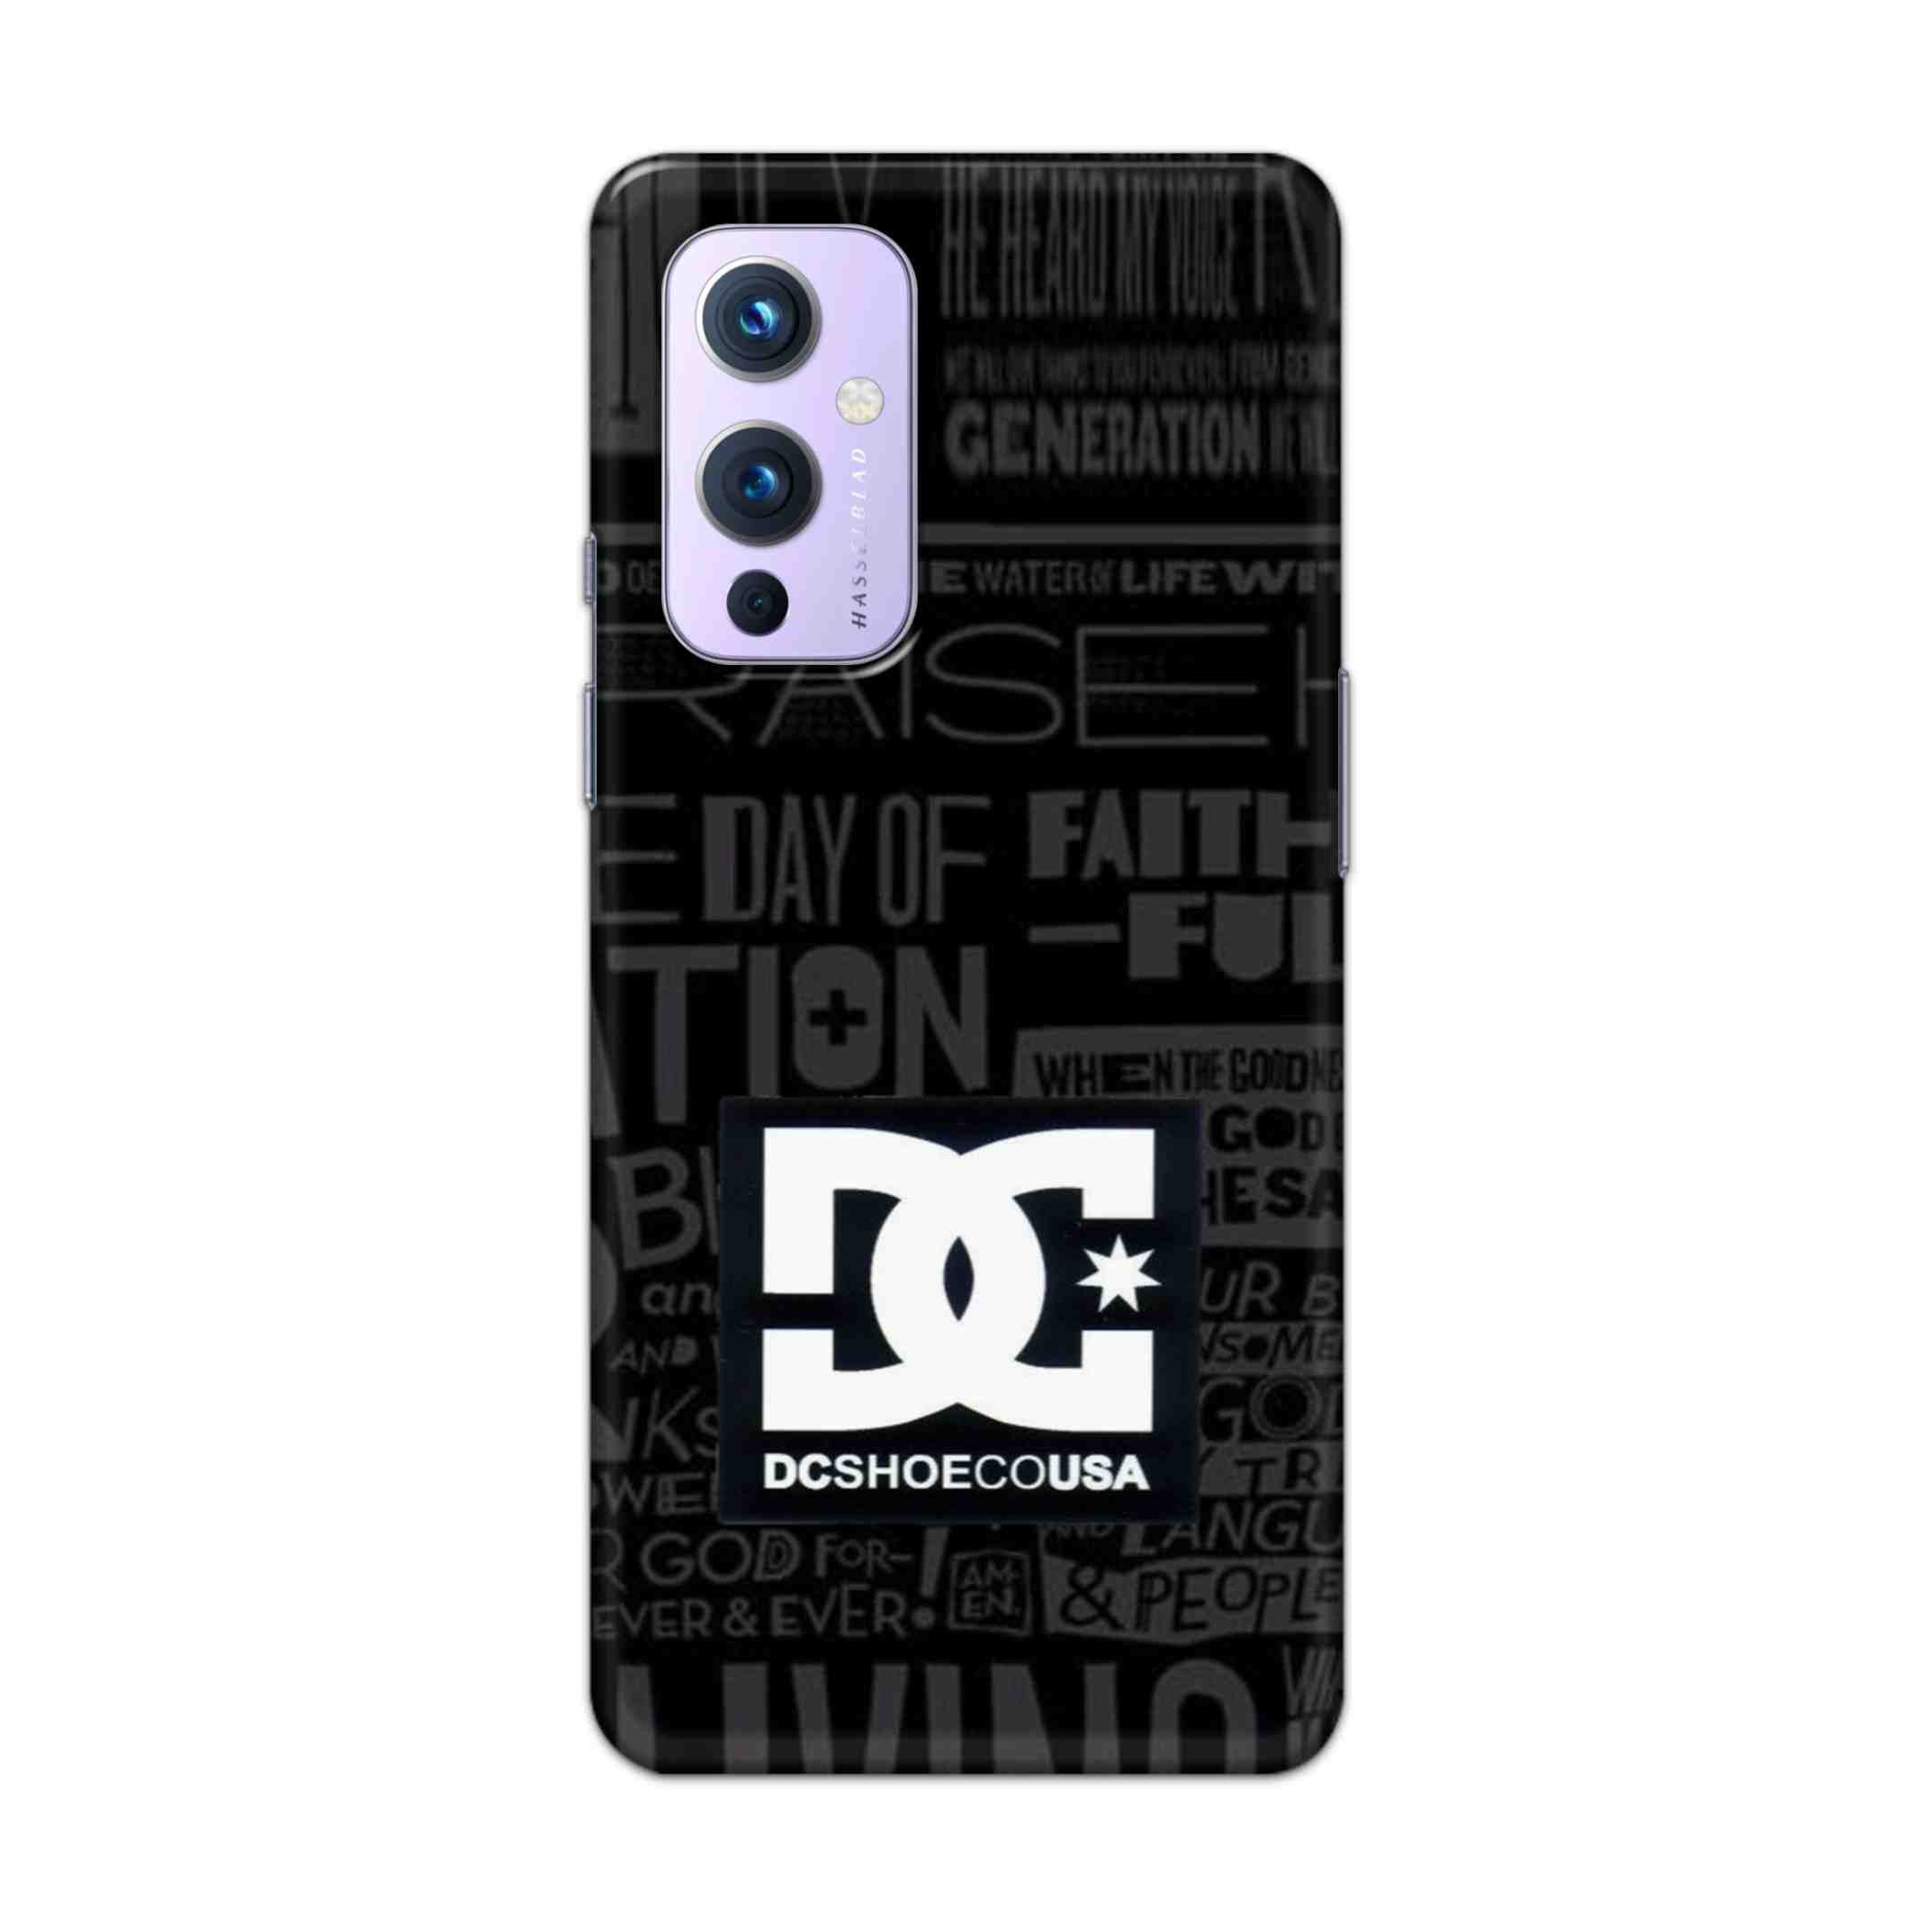 Buy Dc Shoecousa Hard Back Mobile Phone Case Cover For OnePlus 9 Online